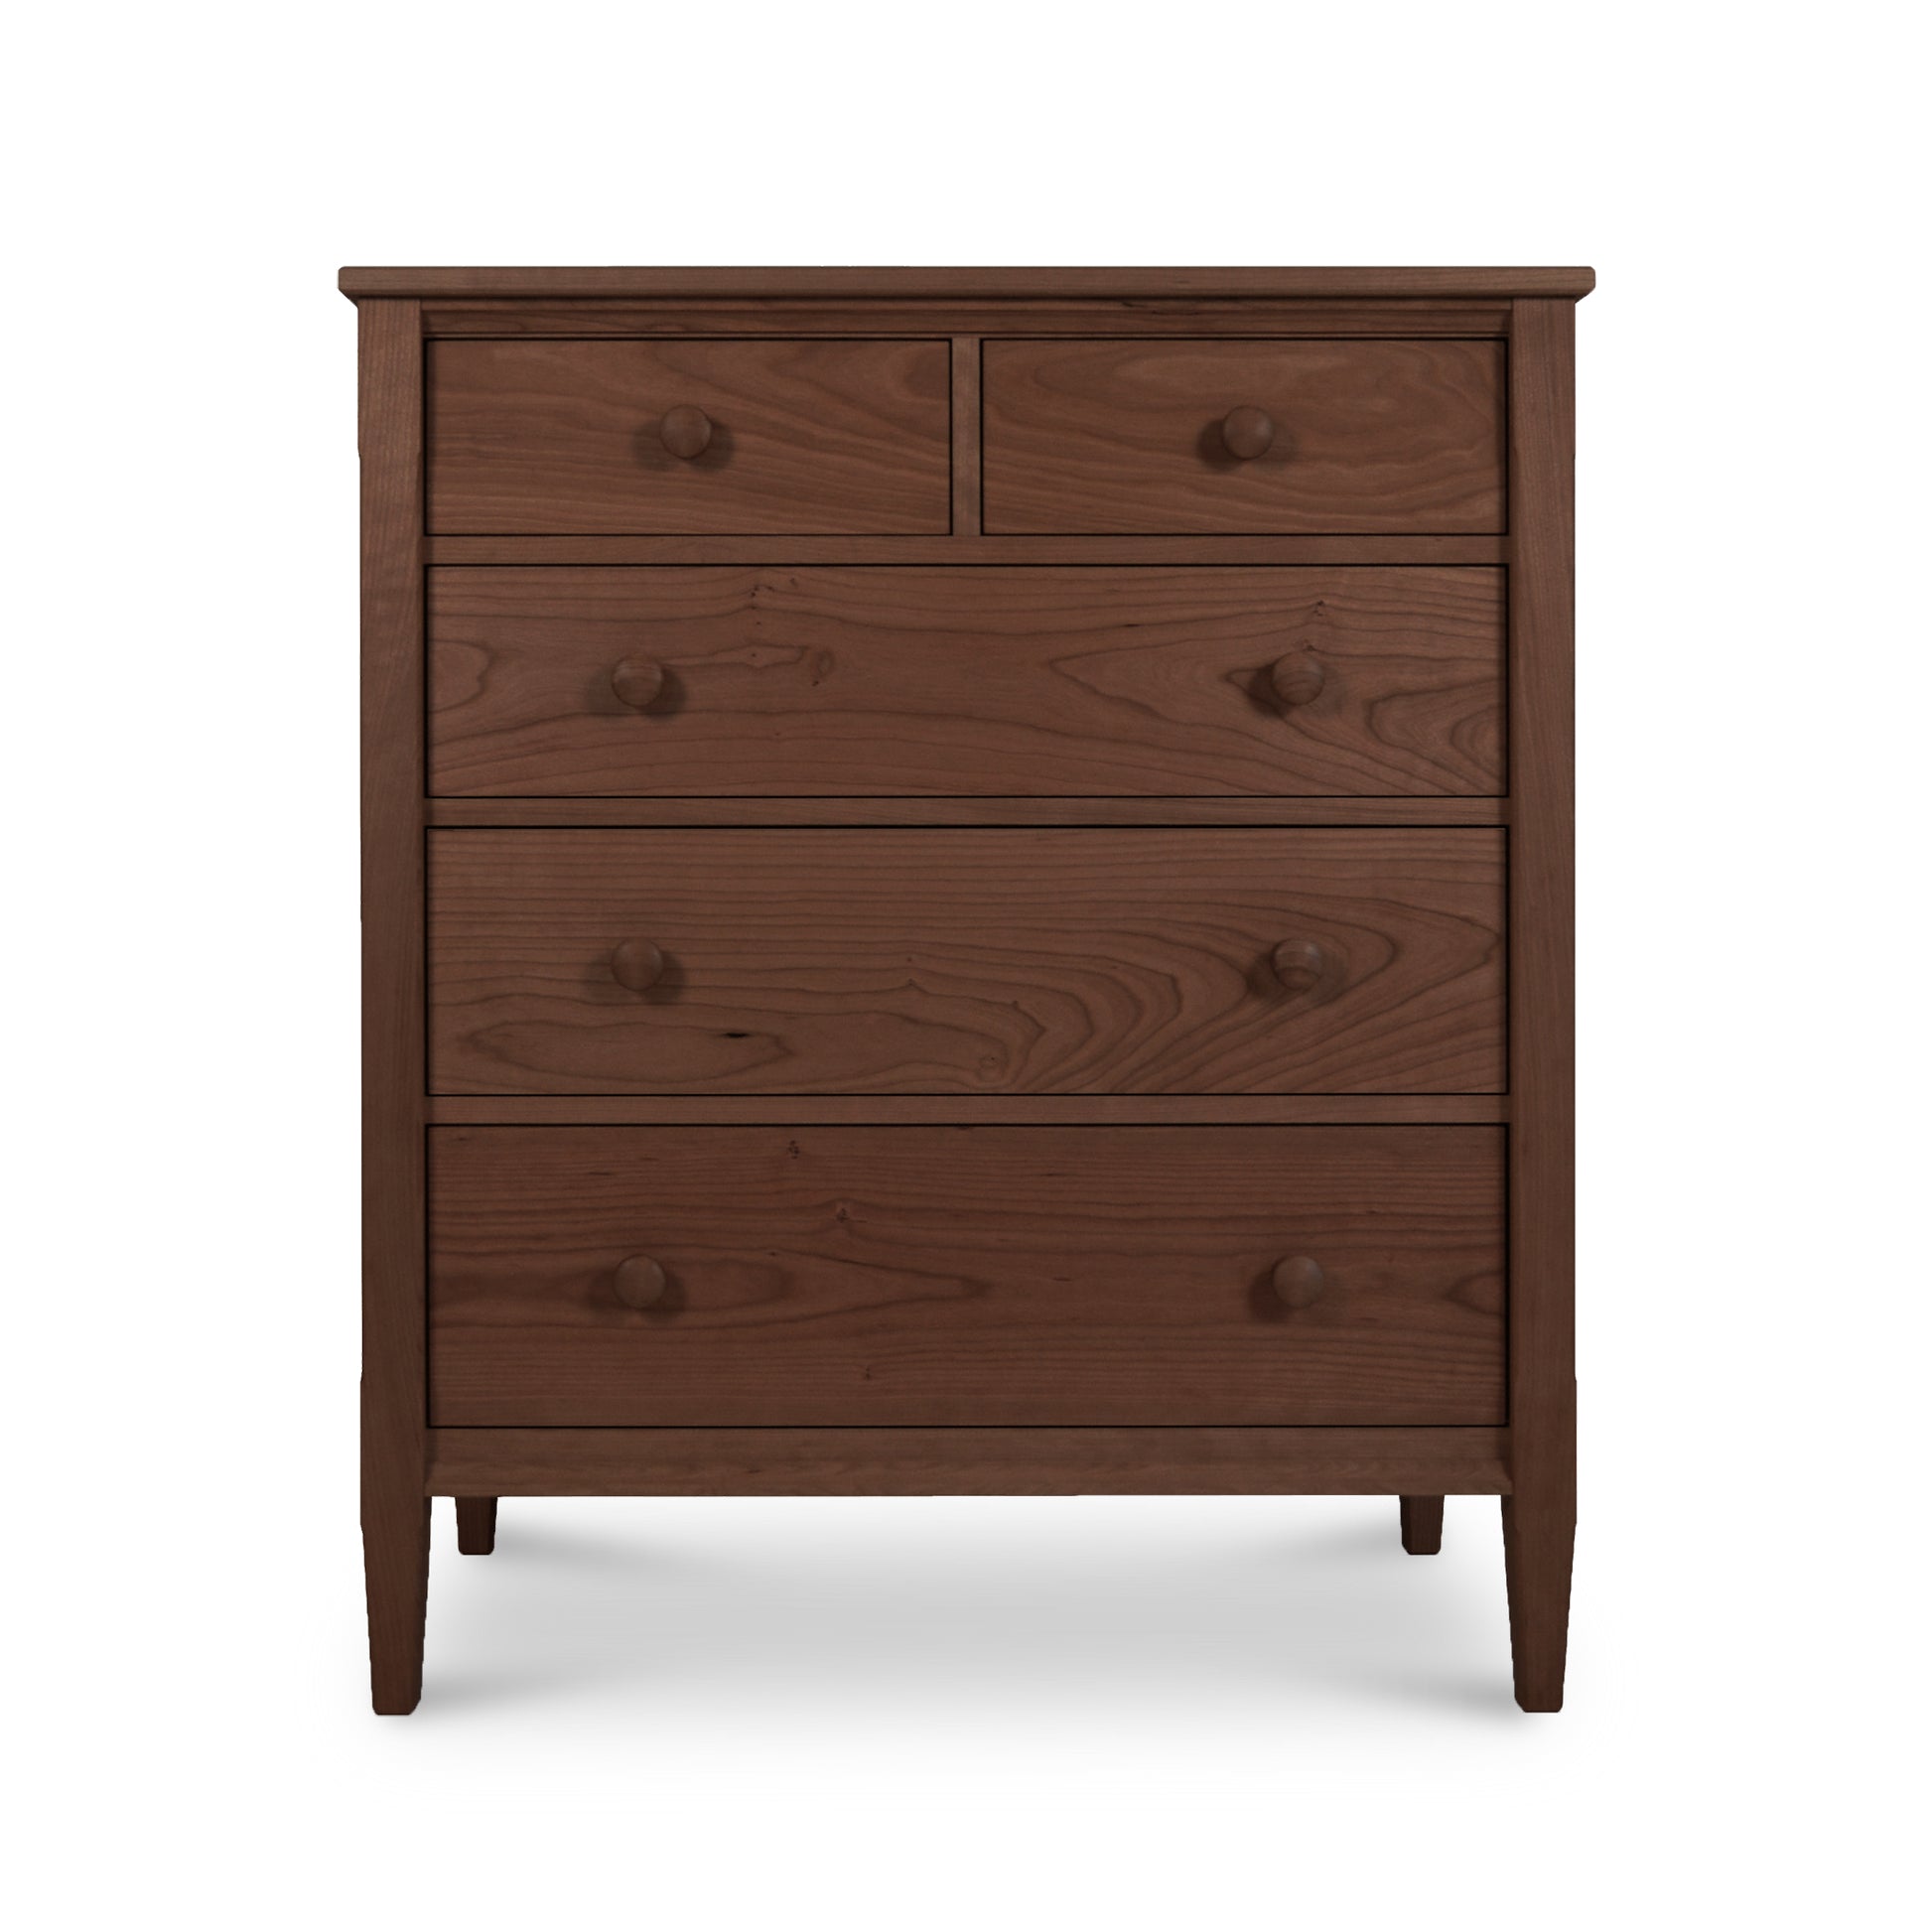 A handcrafted Maple Corner Woodworks Vermont Shaker 5-Drawer Chest with a dark brown finish, featuring round knobs on each drawer, standing on four tapered legs against a plain white background.